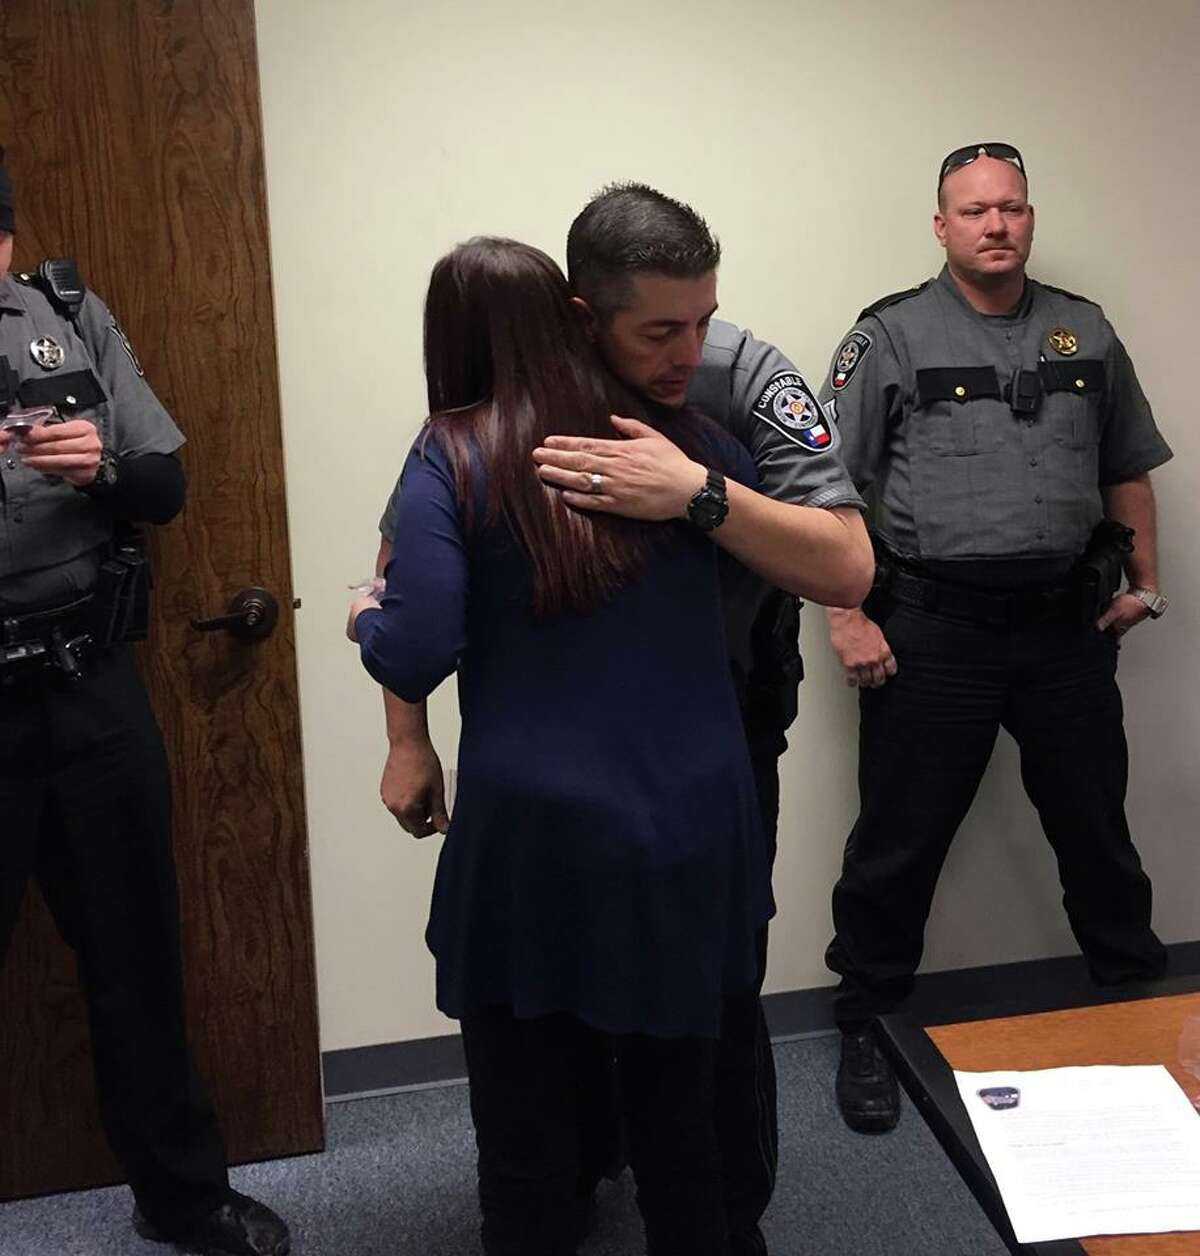 Samantha Bachman recevives a hug from Montgomery County Precinct 4 Constable's Lieutenant Buck Clendennen after presenting the office with Challenge Coins through her project, "One Coin at a Time."